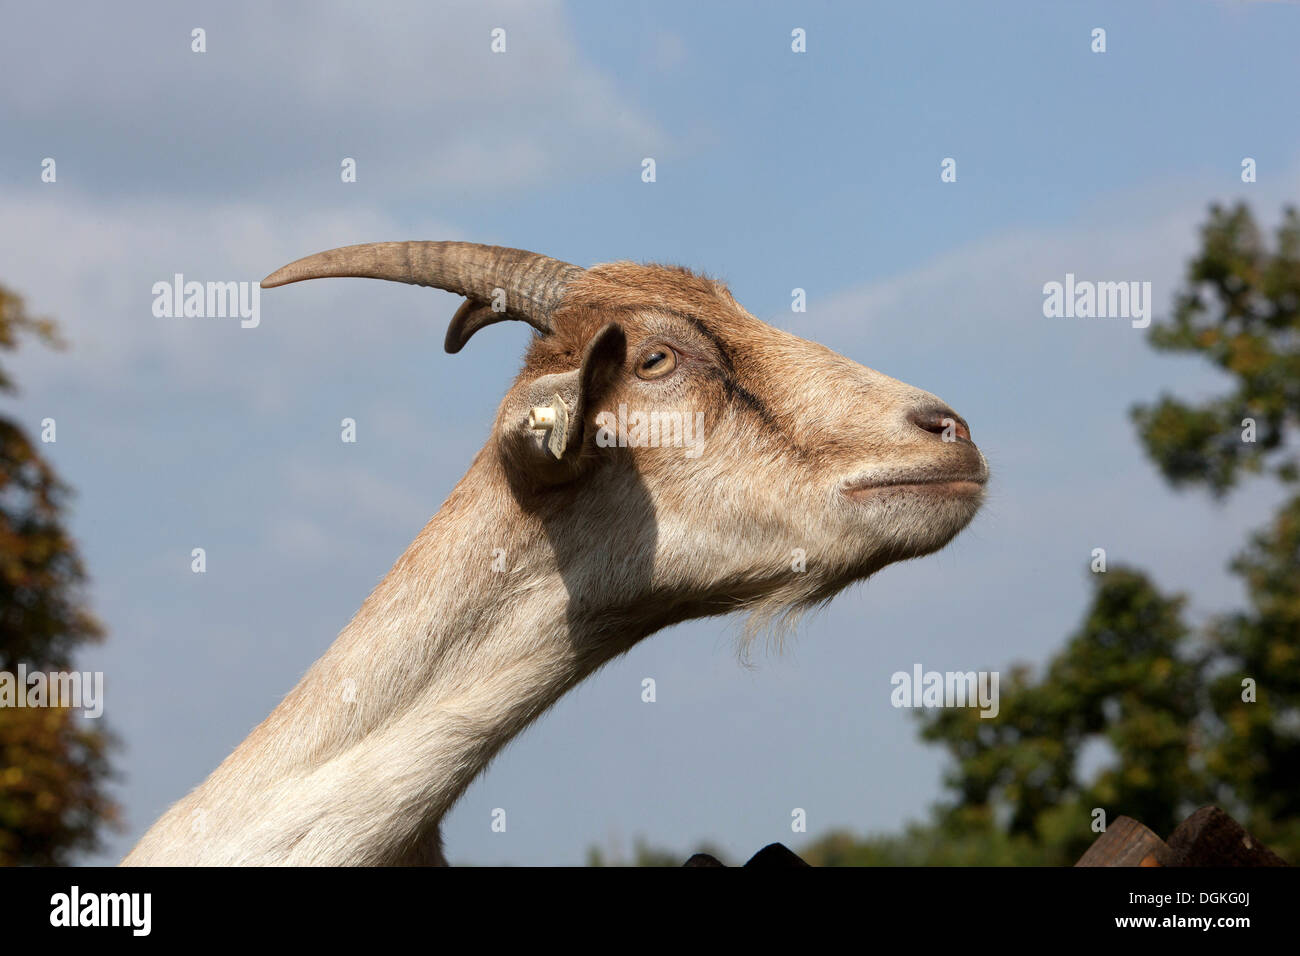 Goat head, horns side view neck Stock Photo